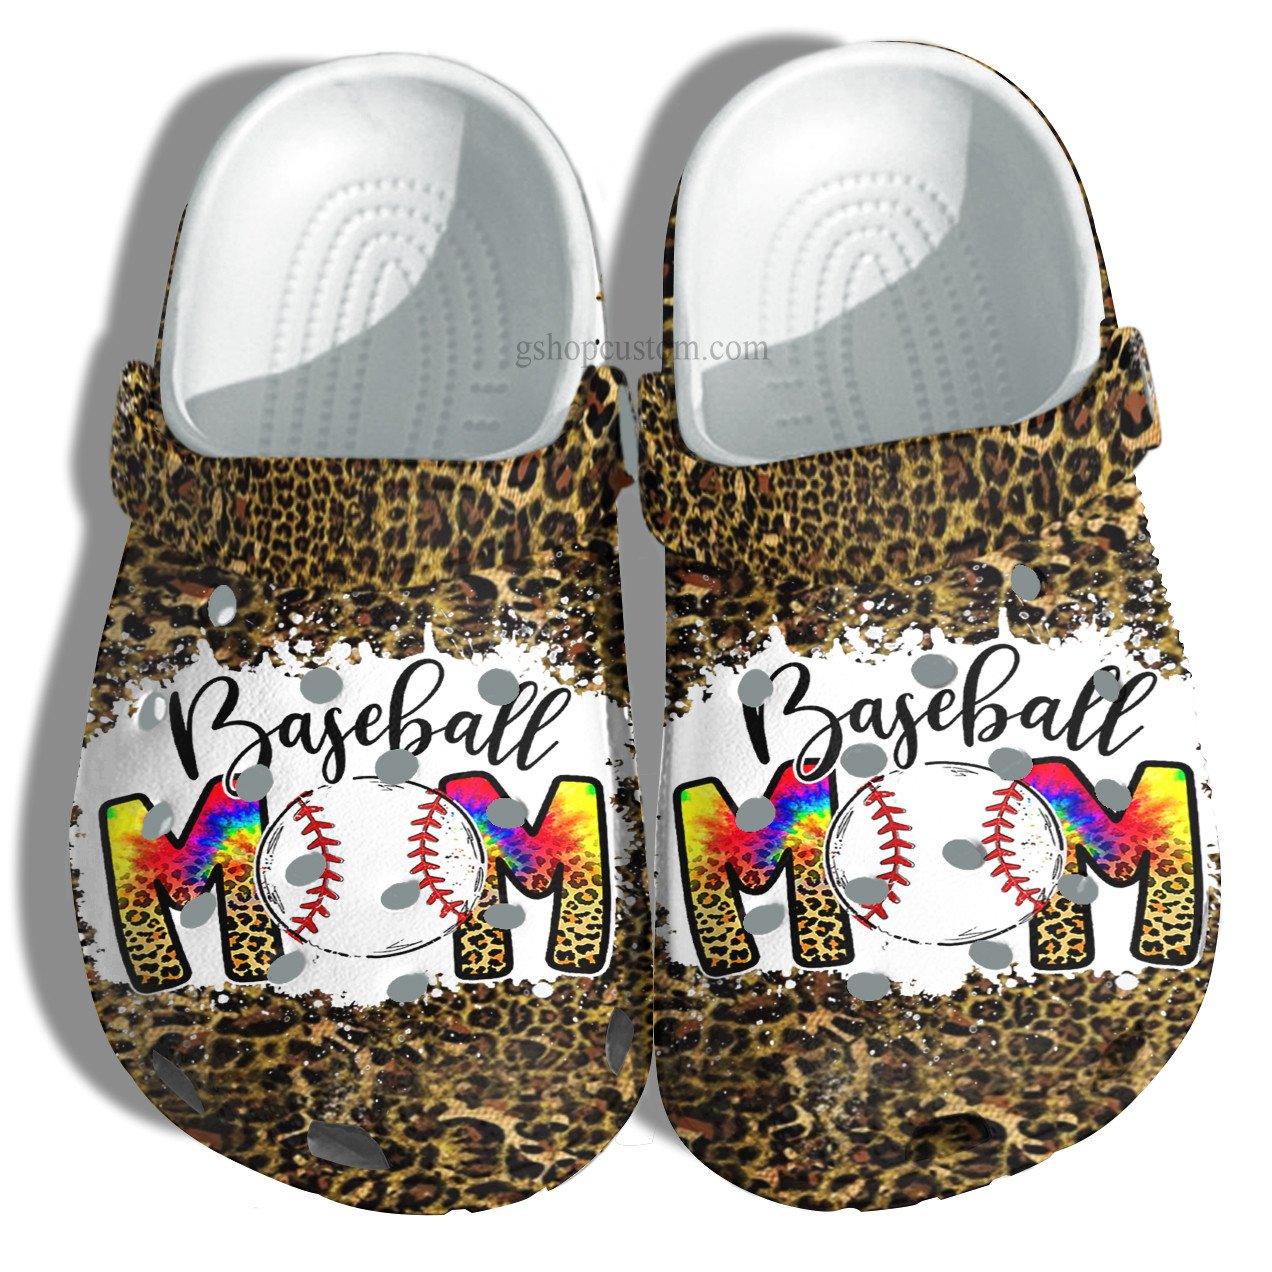 Baseball Mom Hippie Leopard Skin Crocs Shoes For Wife Mom Grandma – Baseball Mom Leopard Shoes Croc Clogs Mother Day Gifts – Cr-Ne0123